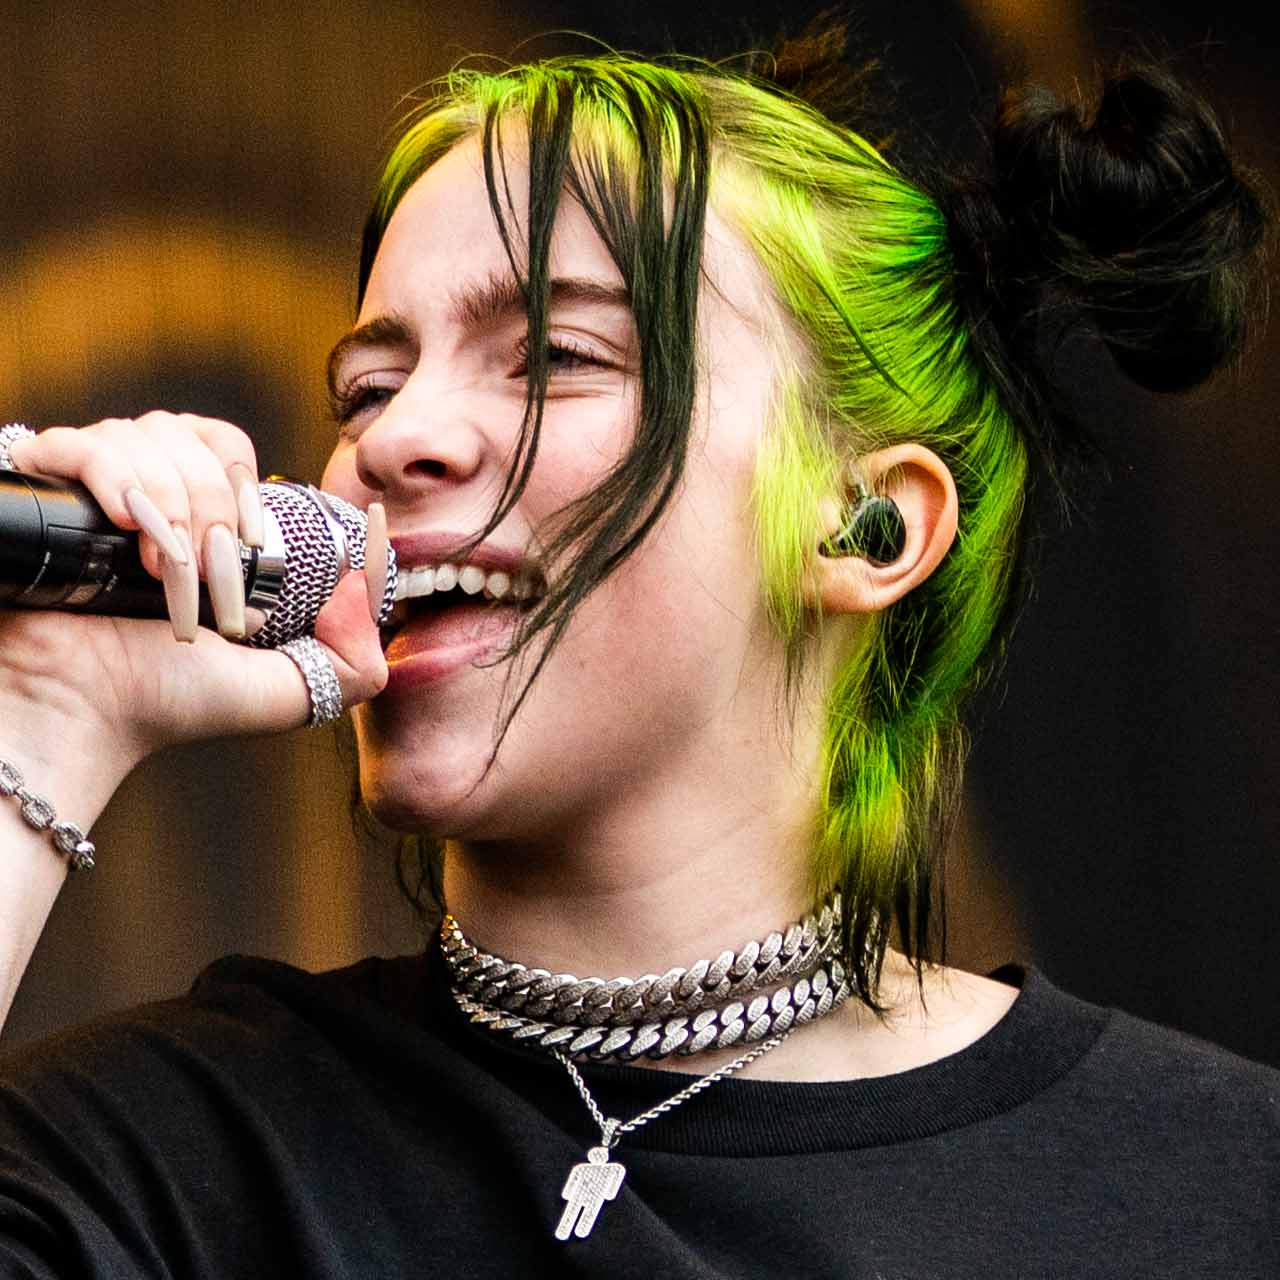 Your First Look At Billie Eilish’s NEW Documentary ‘Billie Eilish: The World’s A Little Blurry’ – WATCH HERE!